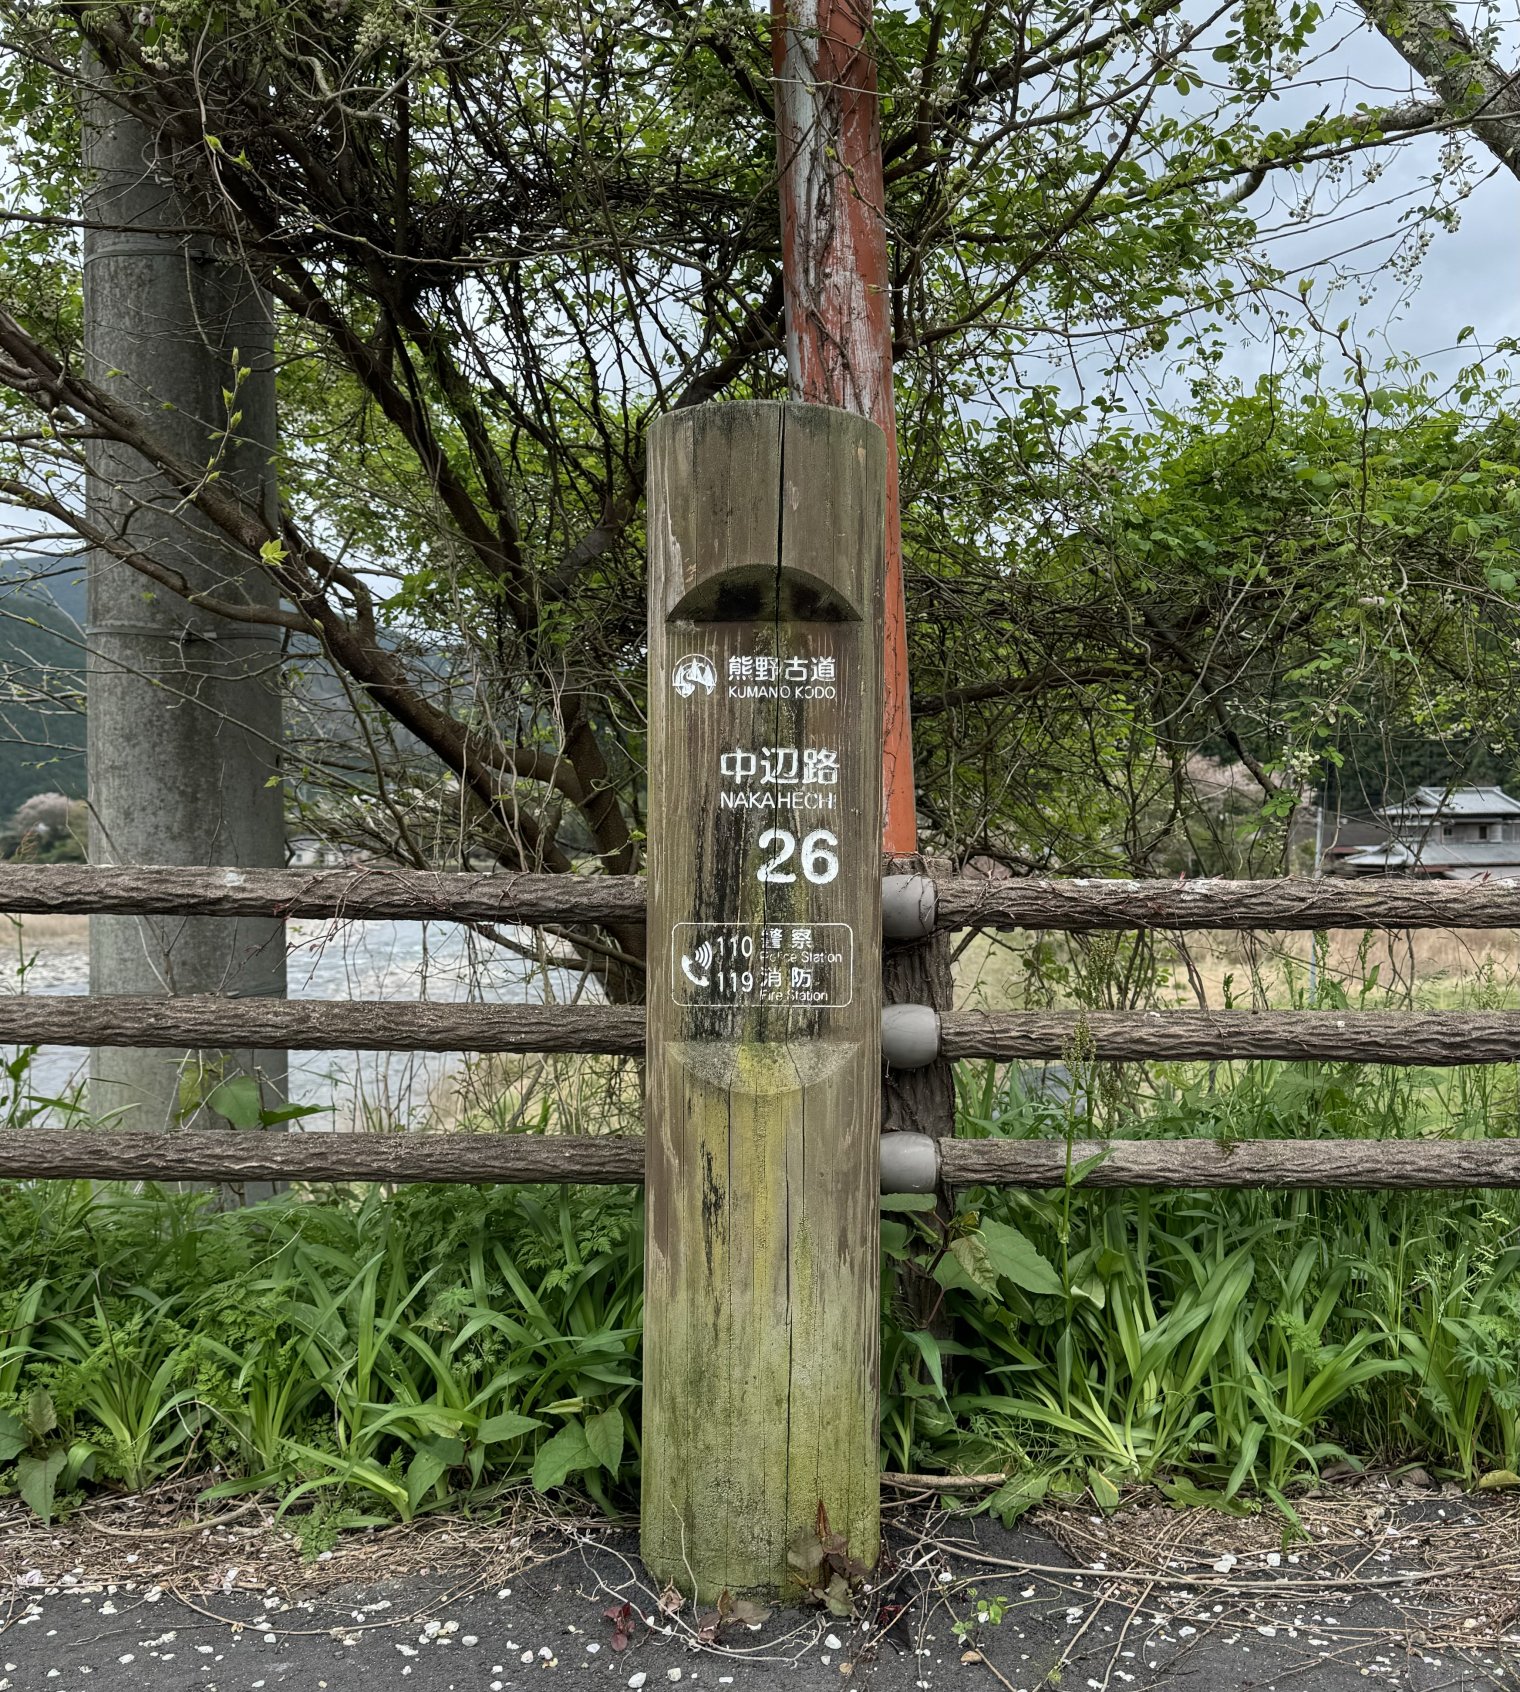 The 26th signpost on the Kumano Kodo trail, indicating a travel distance of approximately 13 kilometres